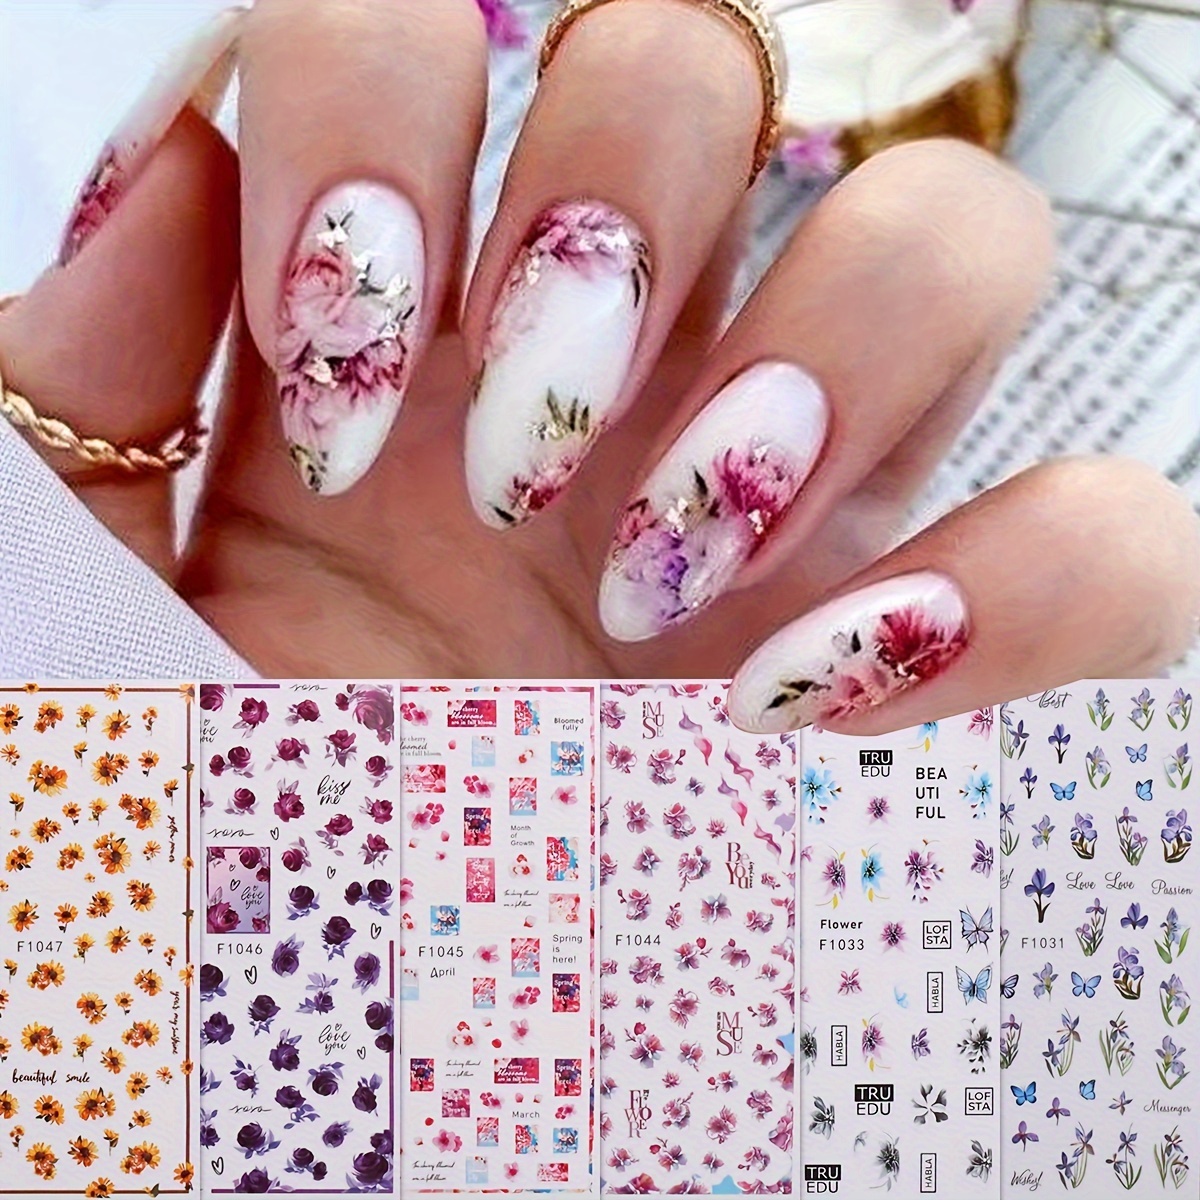 

6-piece Spring & Summer Floral Nail Art Stickers - Self-adhesive, Sparkle Finish With Flowers & Butterflies For Easy Diy Manicure